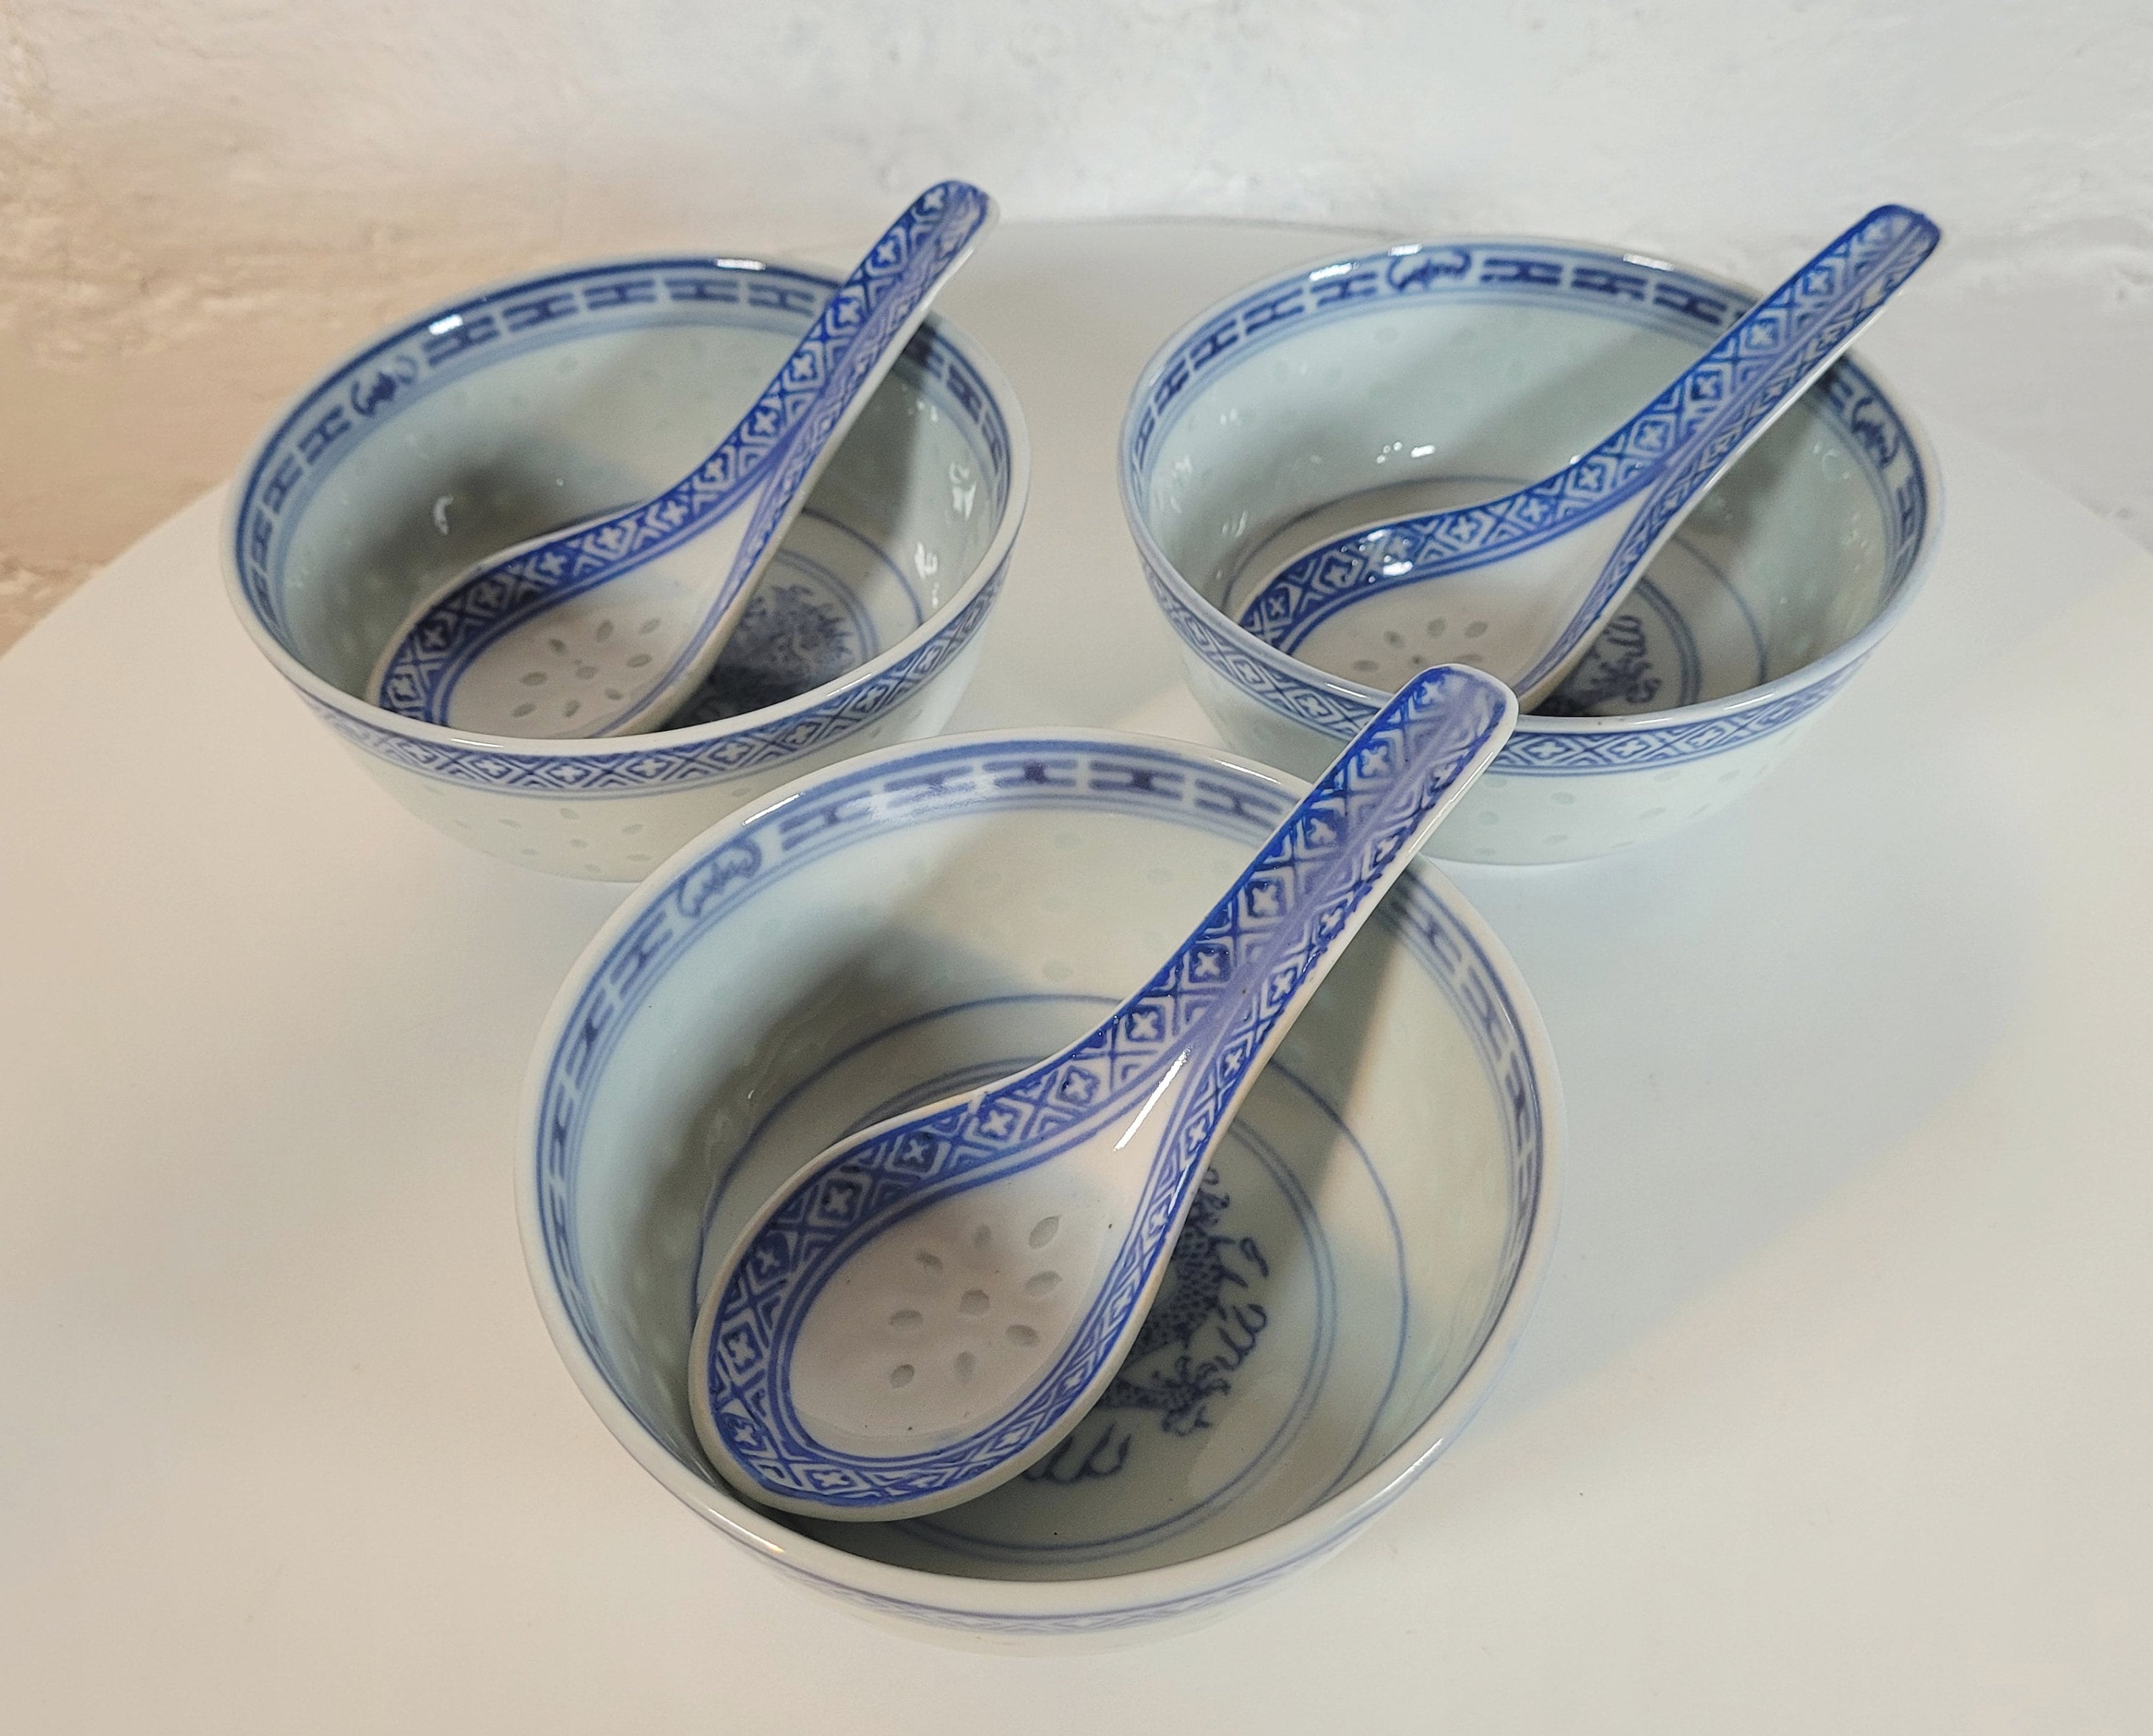 Three Vintage Chinese Soup Bowls With Spoons / Blue and White Rice Grain  China / Blue and White Pottery / Traditional Chinese Pottery -  Canada